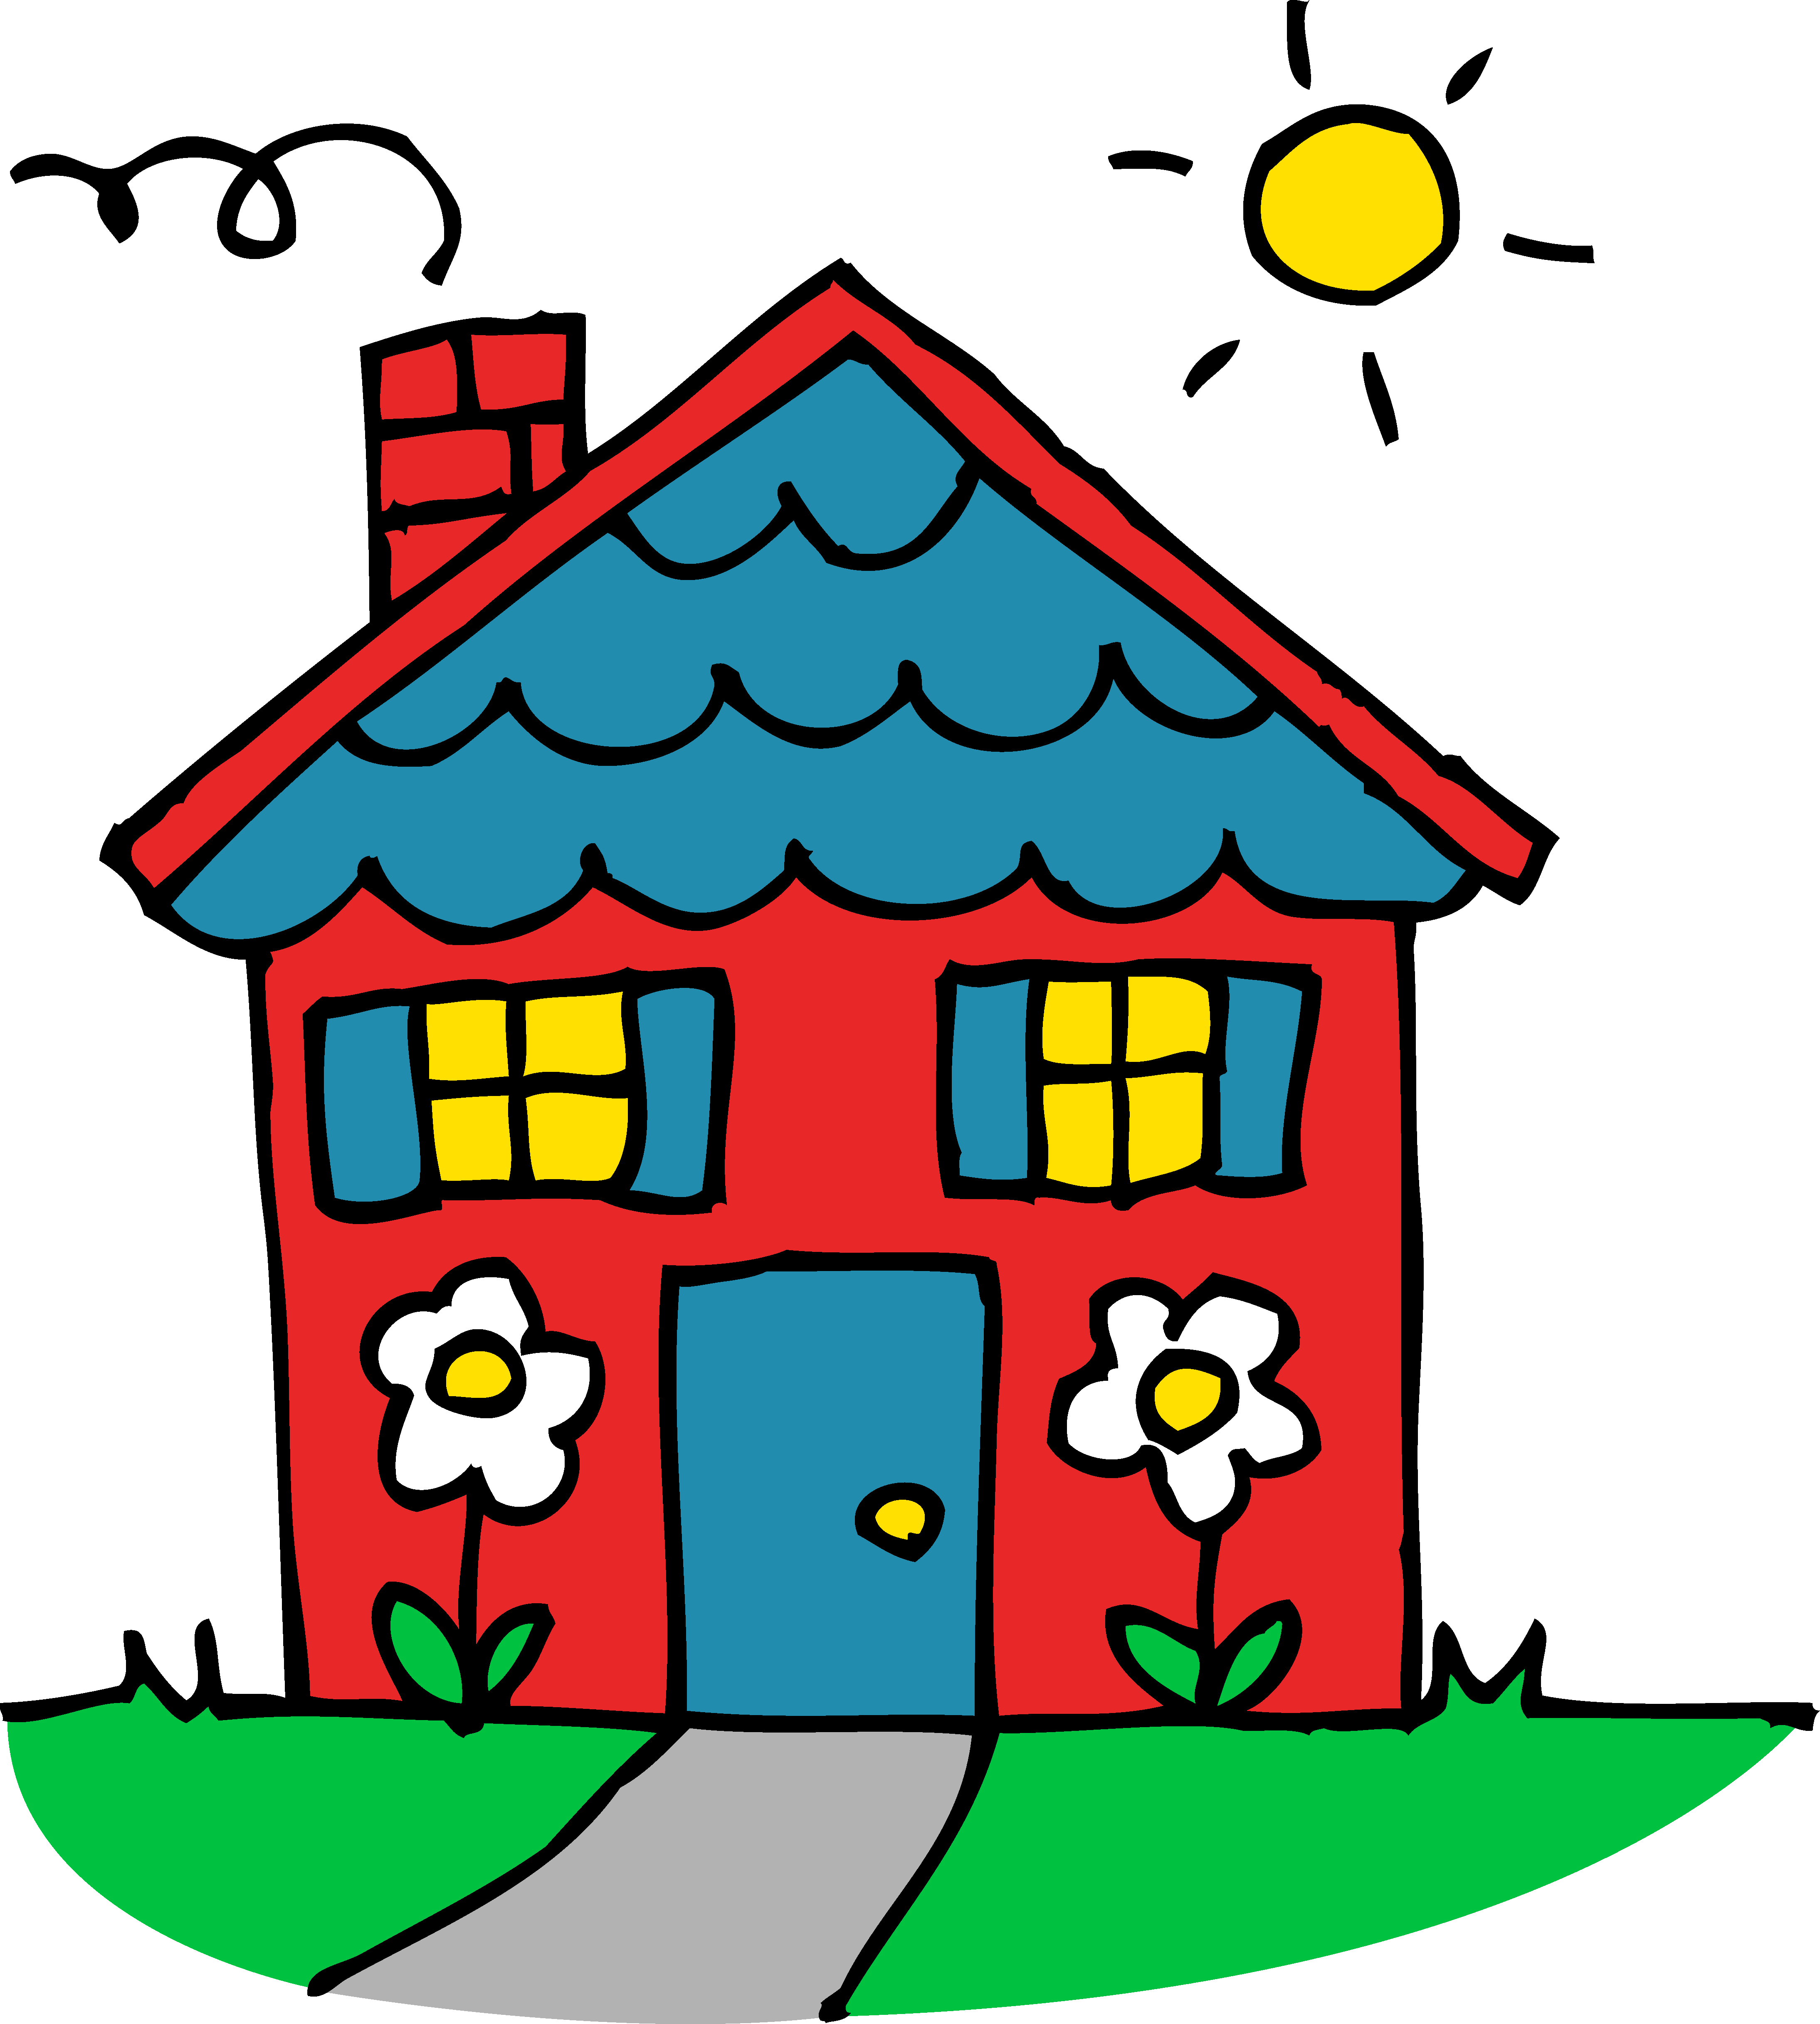 House for sale clip art free clipart images